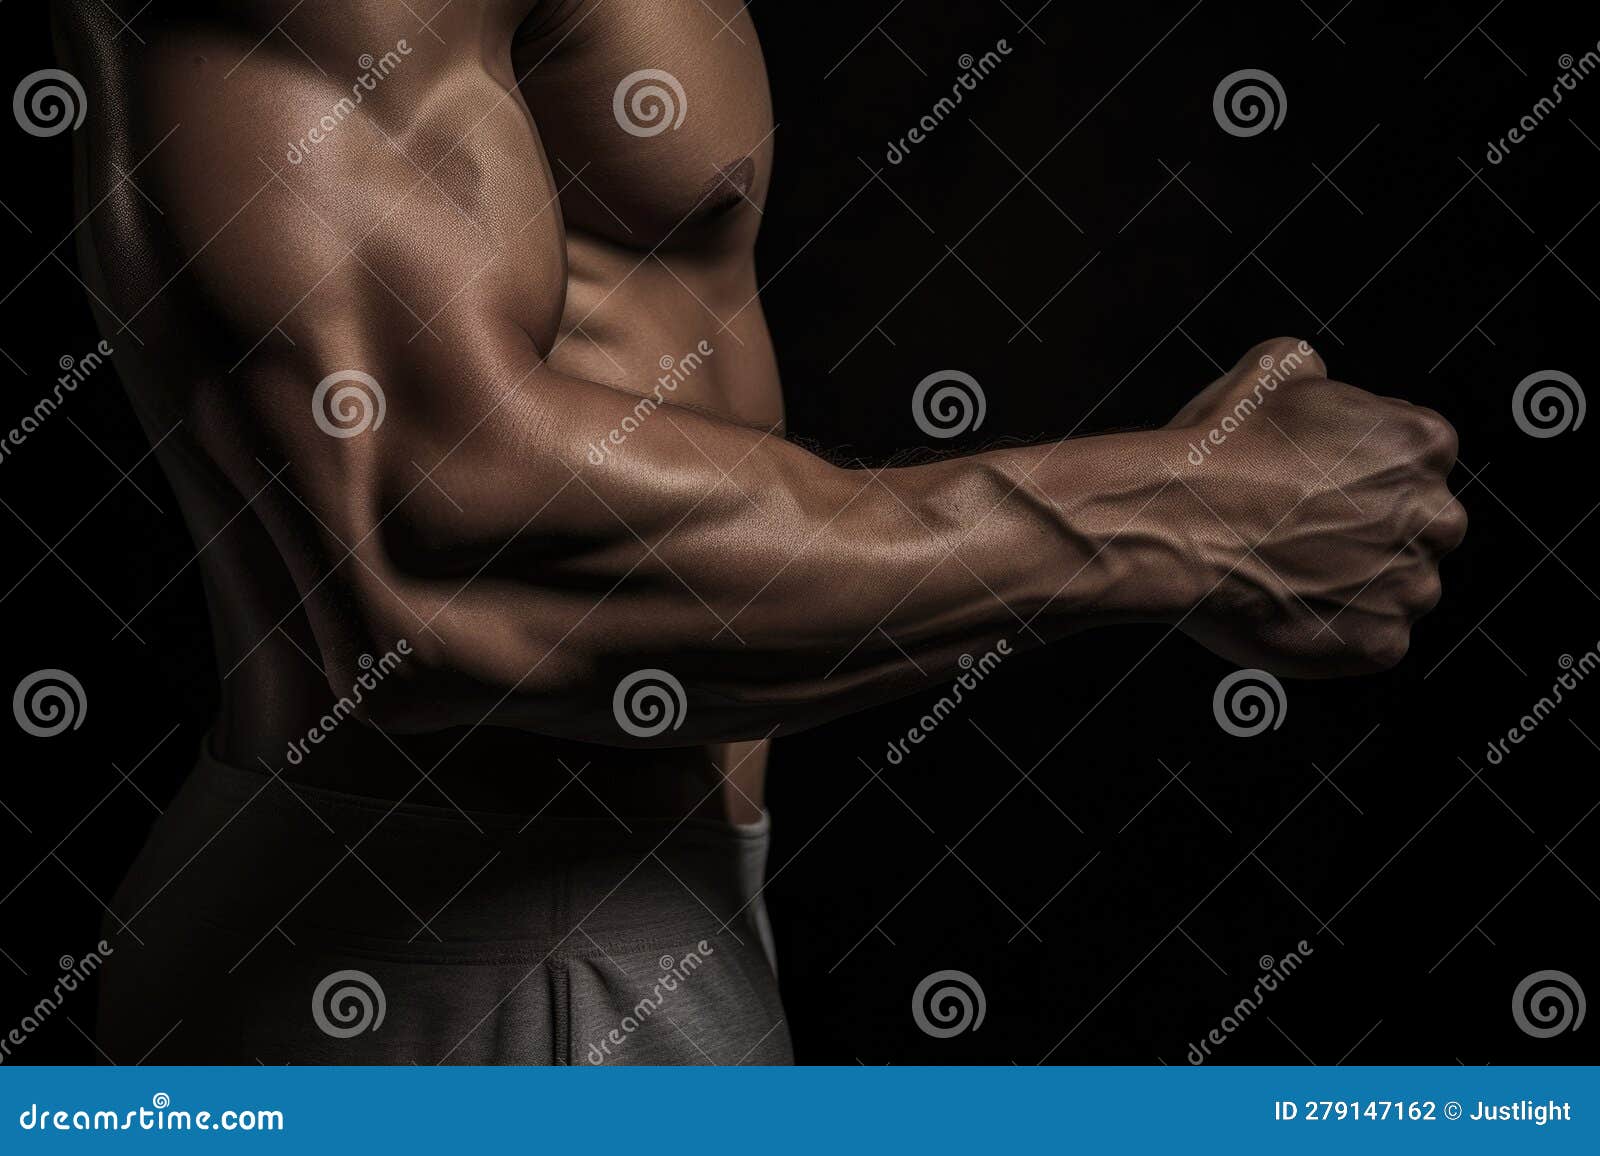 Firm and Defined Biceps a Testimony To Passion and Resolve. Stock  Illustration - Illustration of male, strength: 279147162